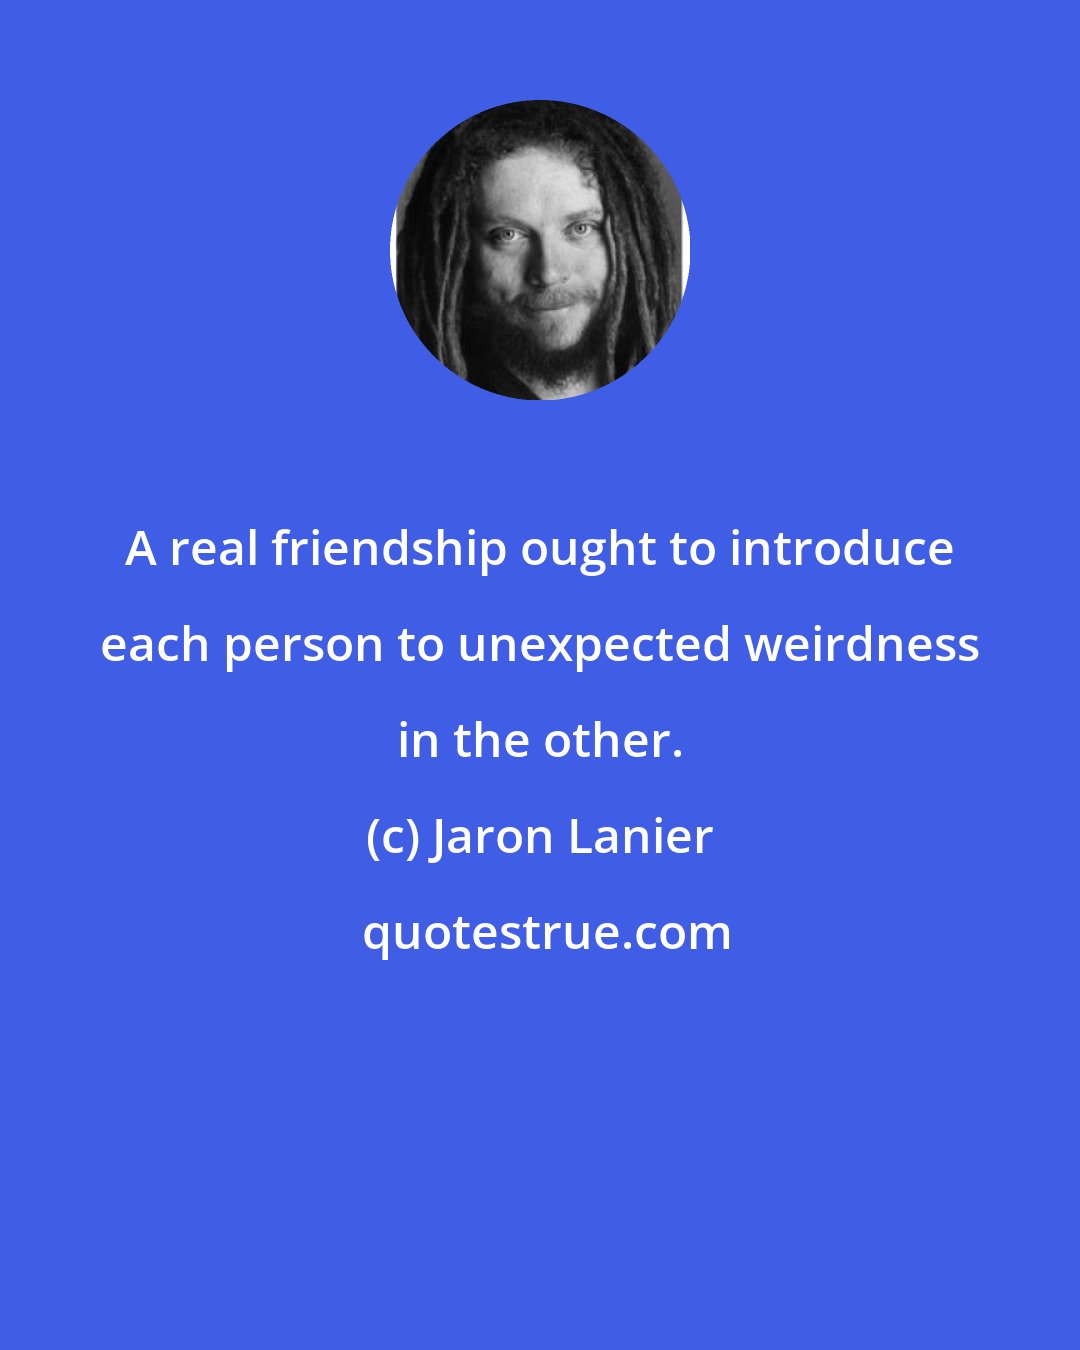 Jaron Lanier: A real friendship ought to introduce each person to unexpected weirdness in the other.